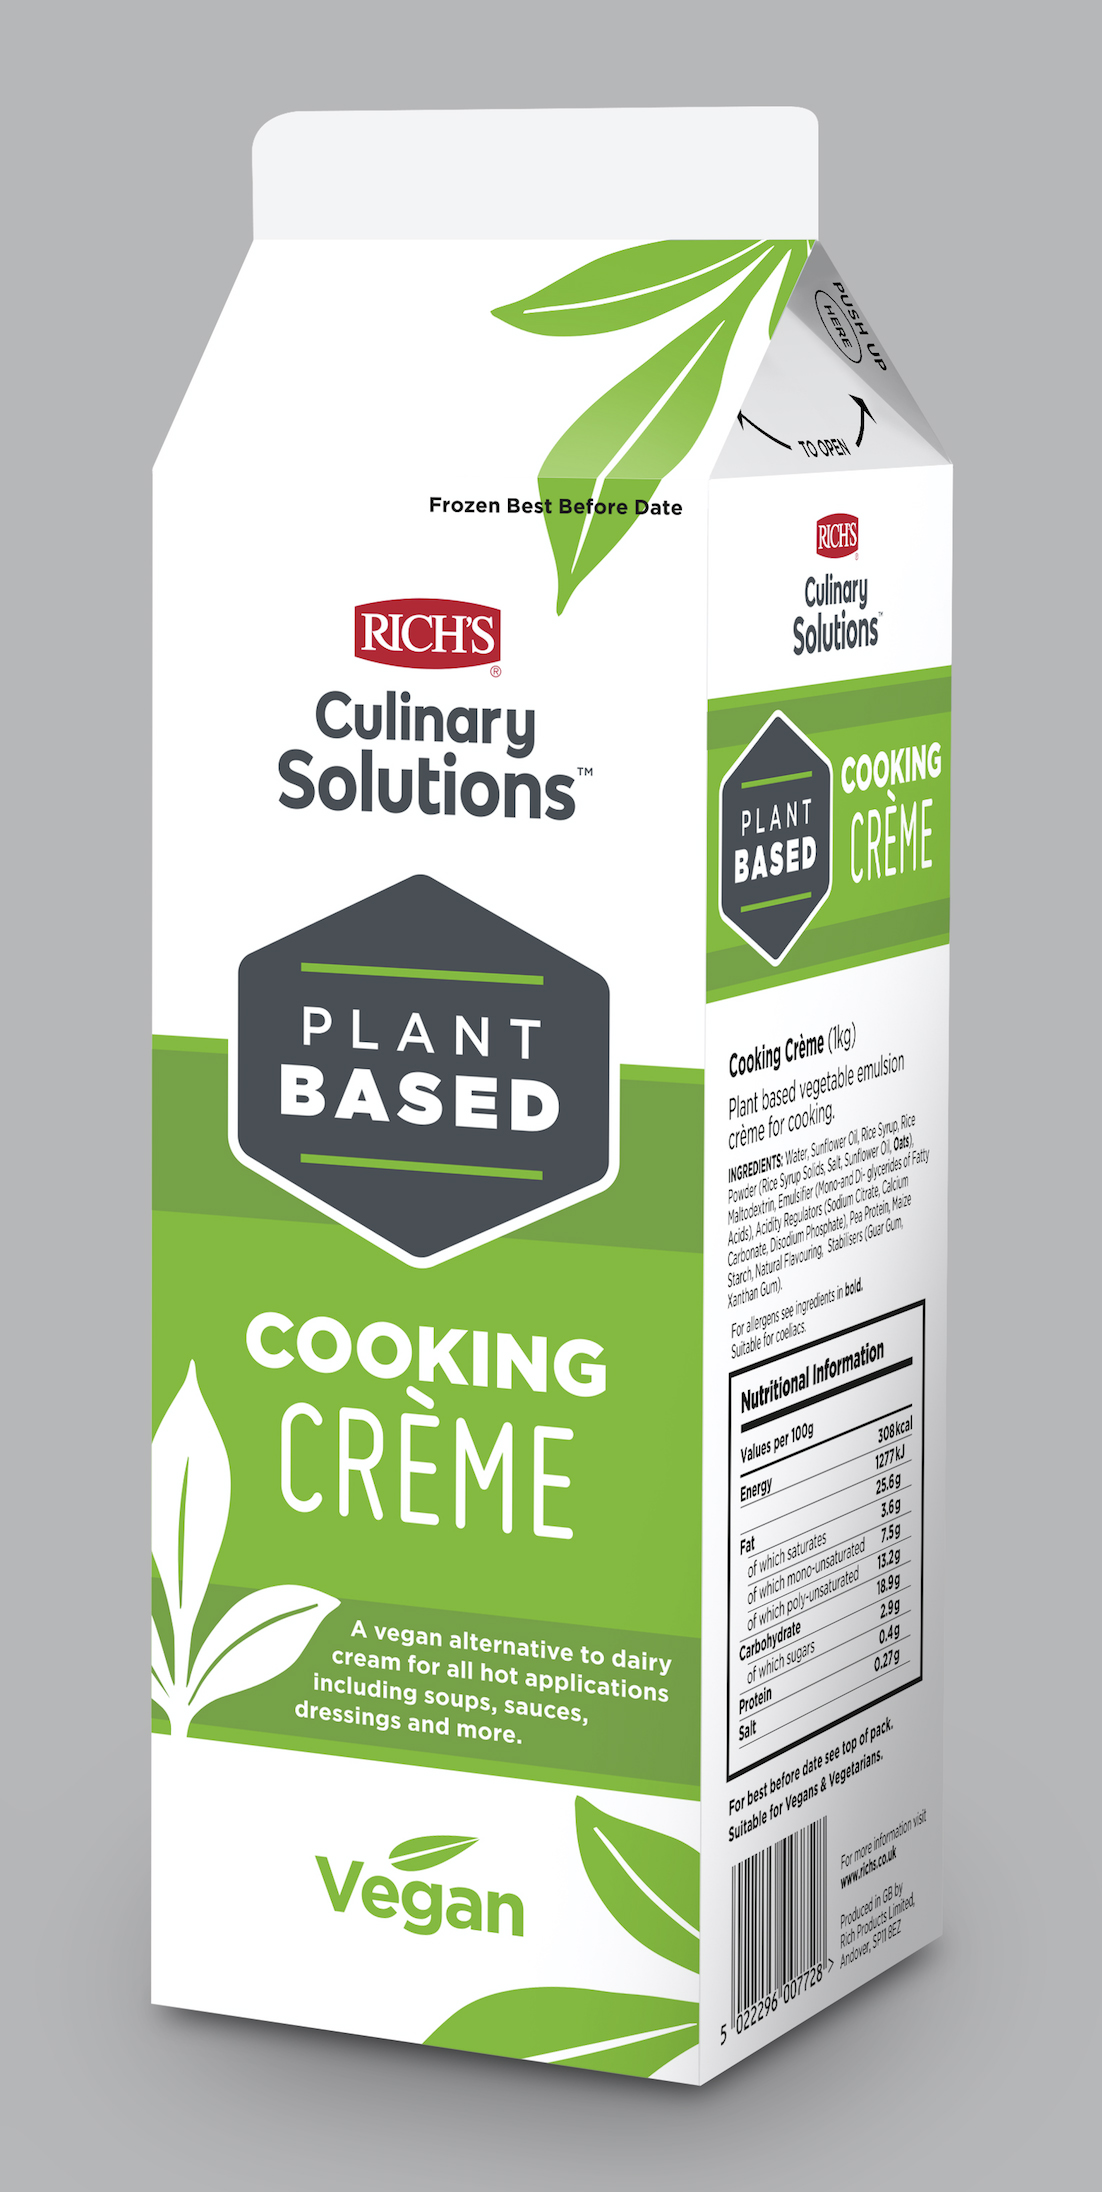 Rich’s Plant Based Cooking Creme